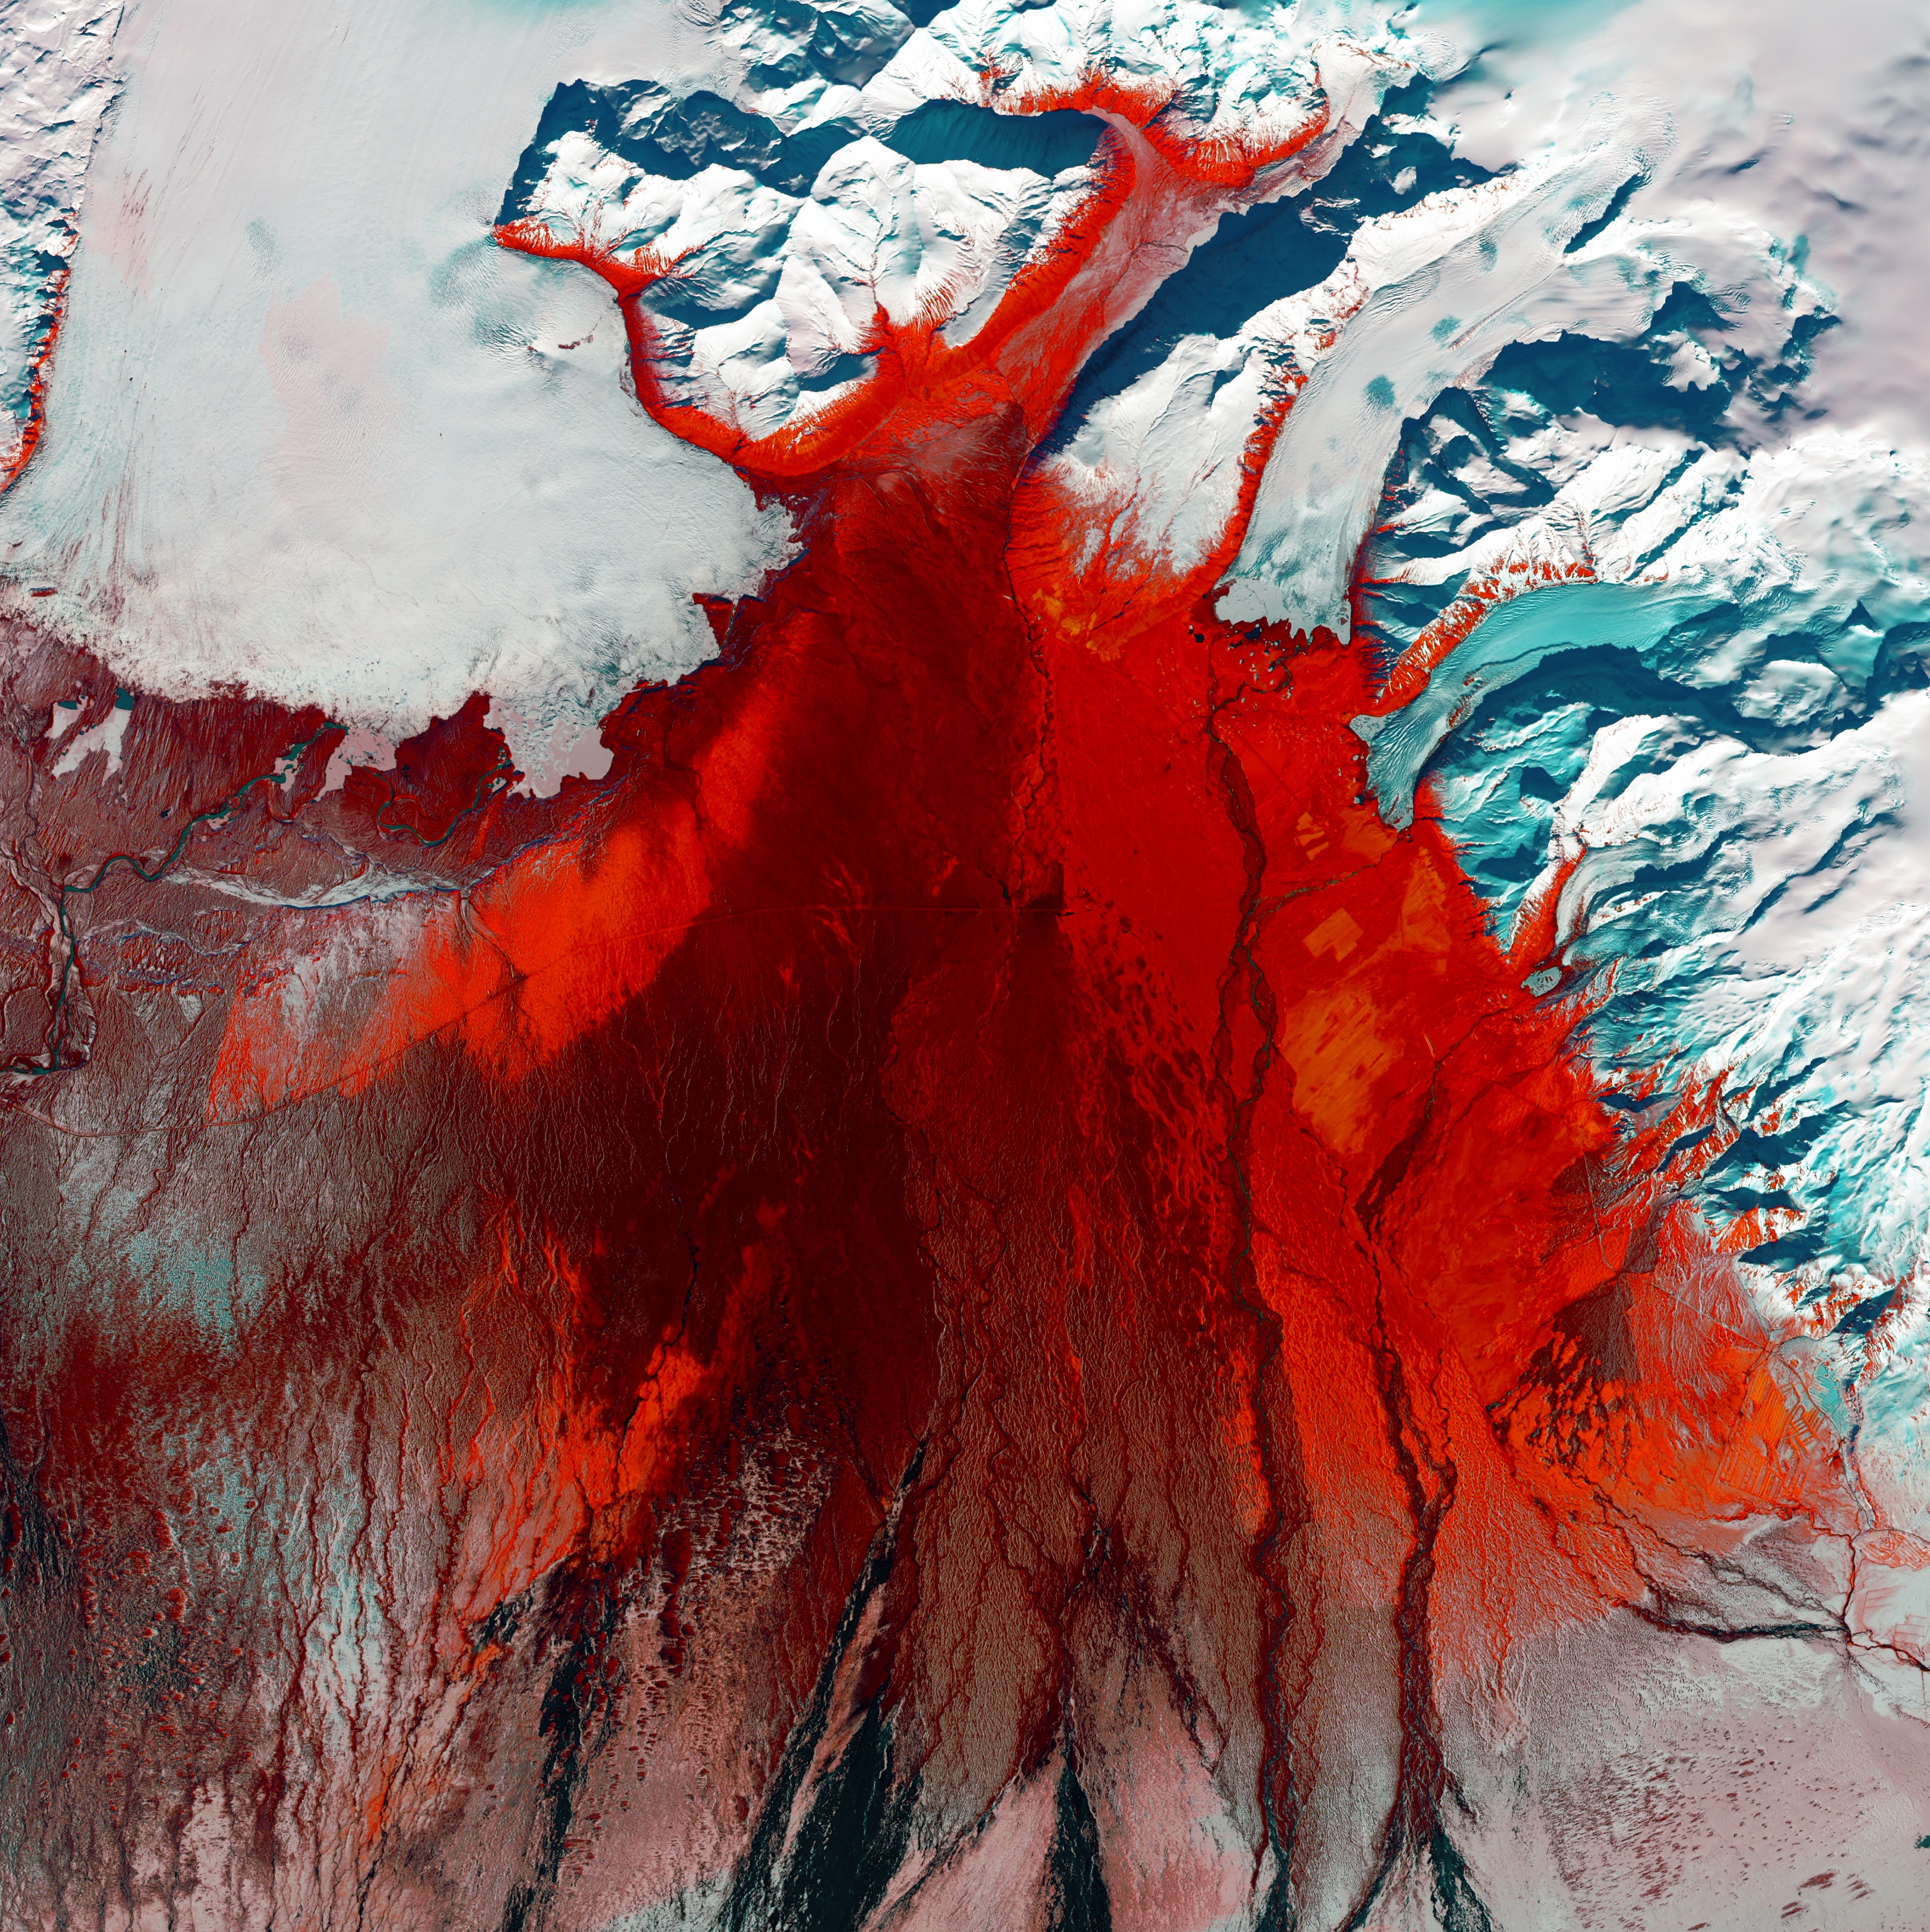 glacier, view from above, nature, ice, red, relief High Definition image